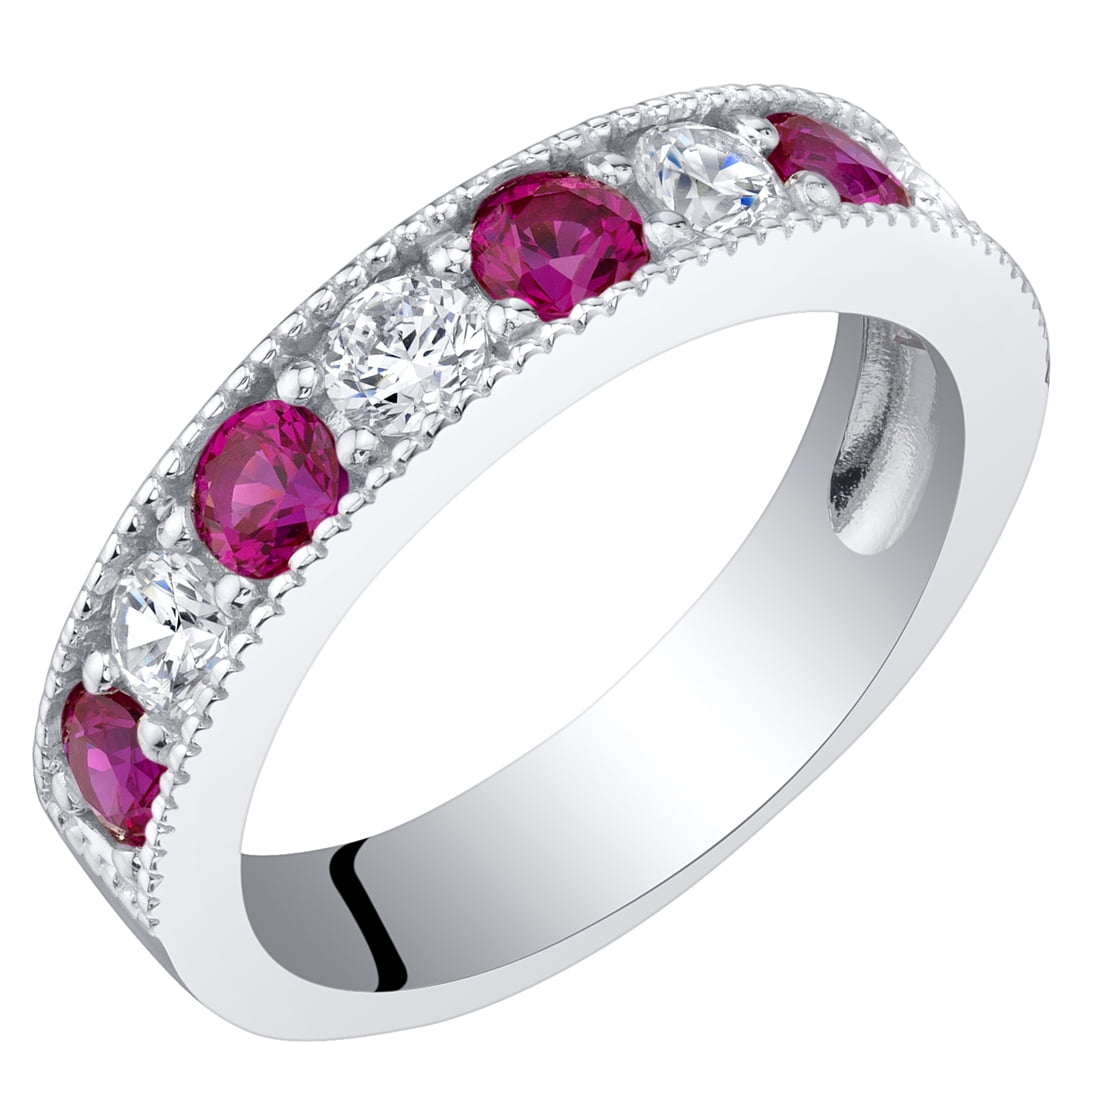 0.48 Ct Red Created Ruby White Created Sapphire 925 Silver Wedding Band Ring Available in size 5, 6, 7, 8, 9 